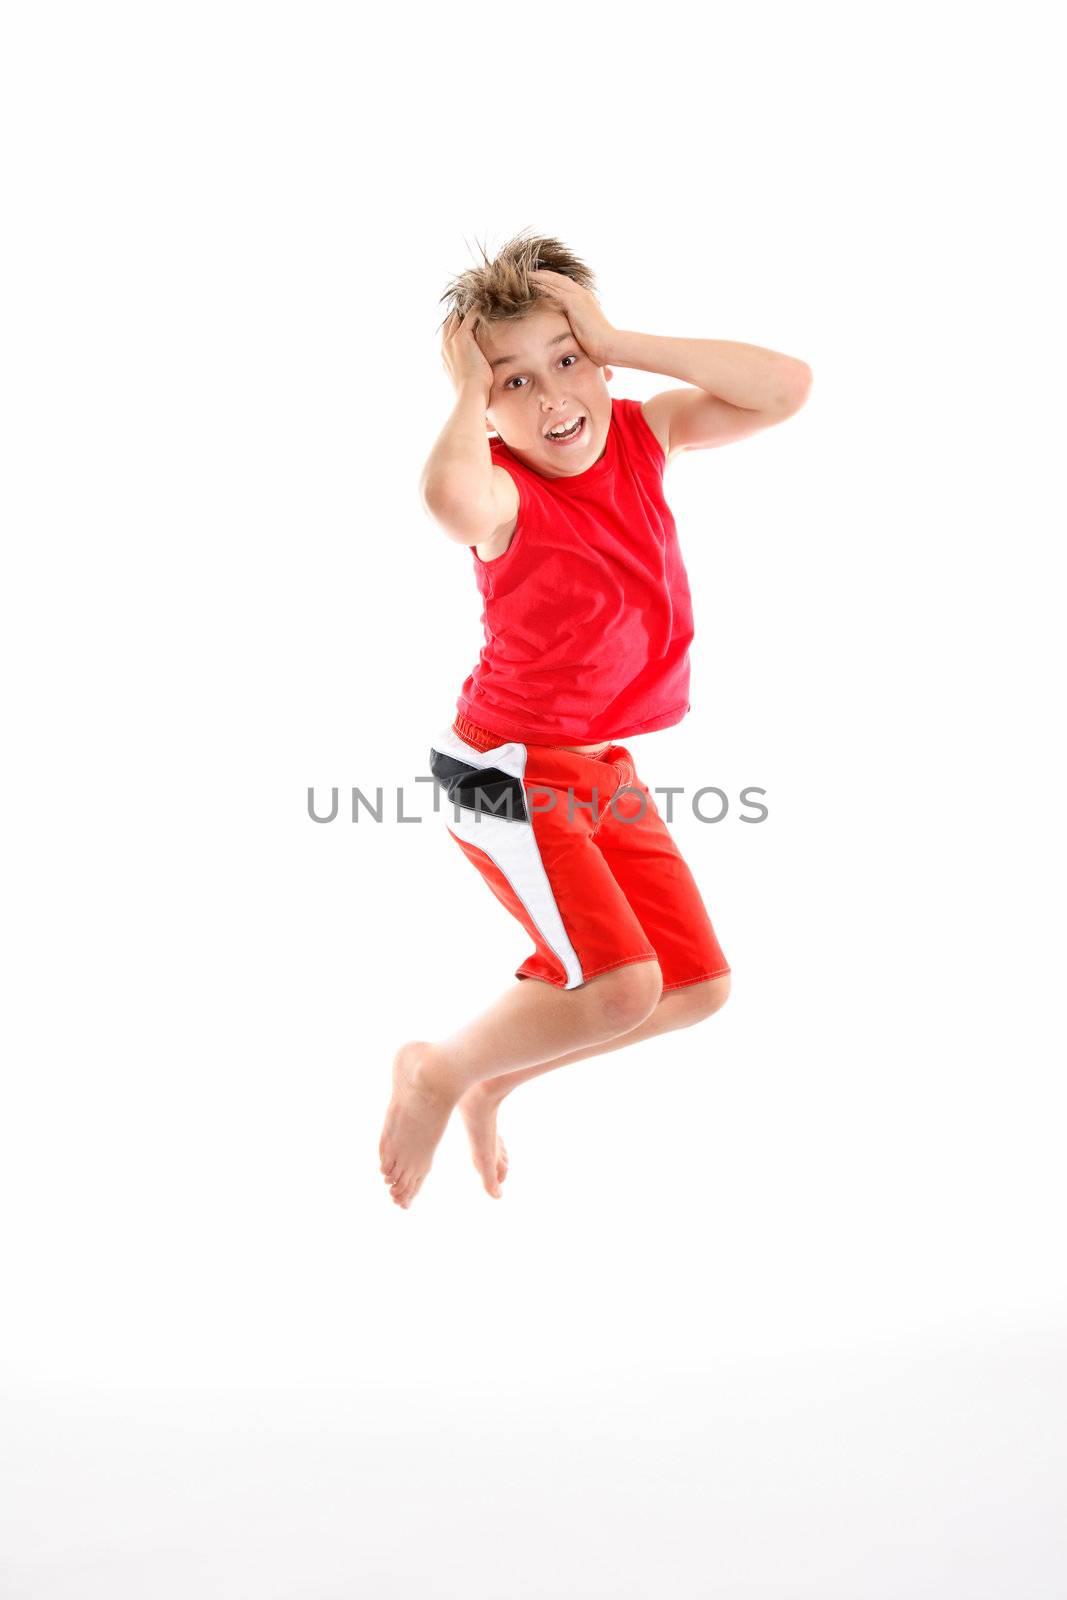 A panicked boy mid air grabs his head in fear or apprehension.